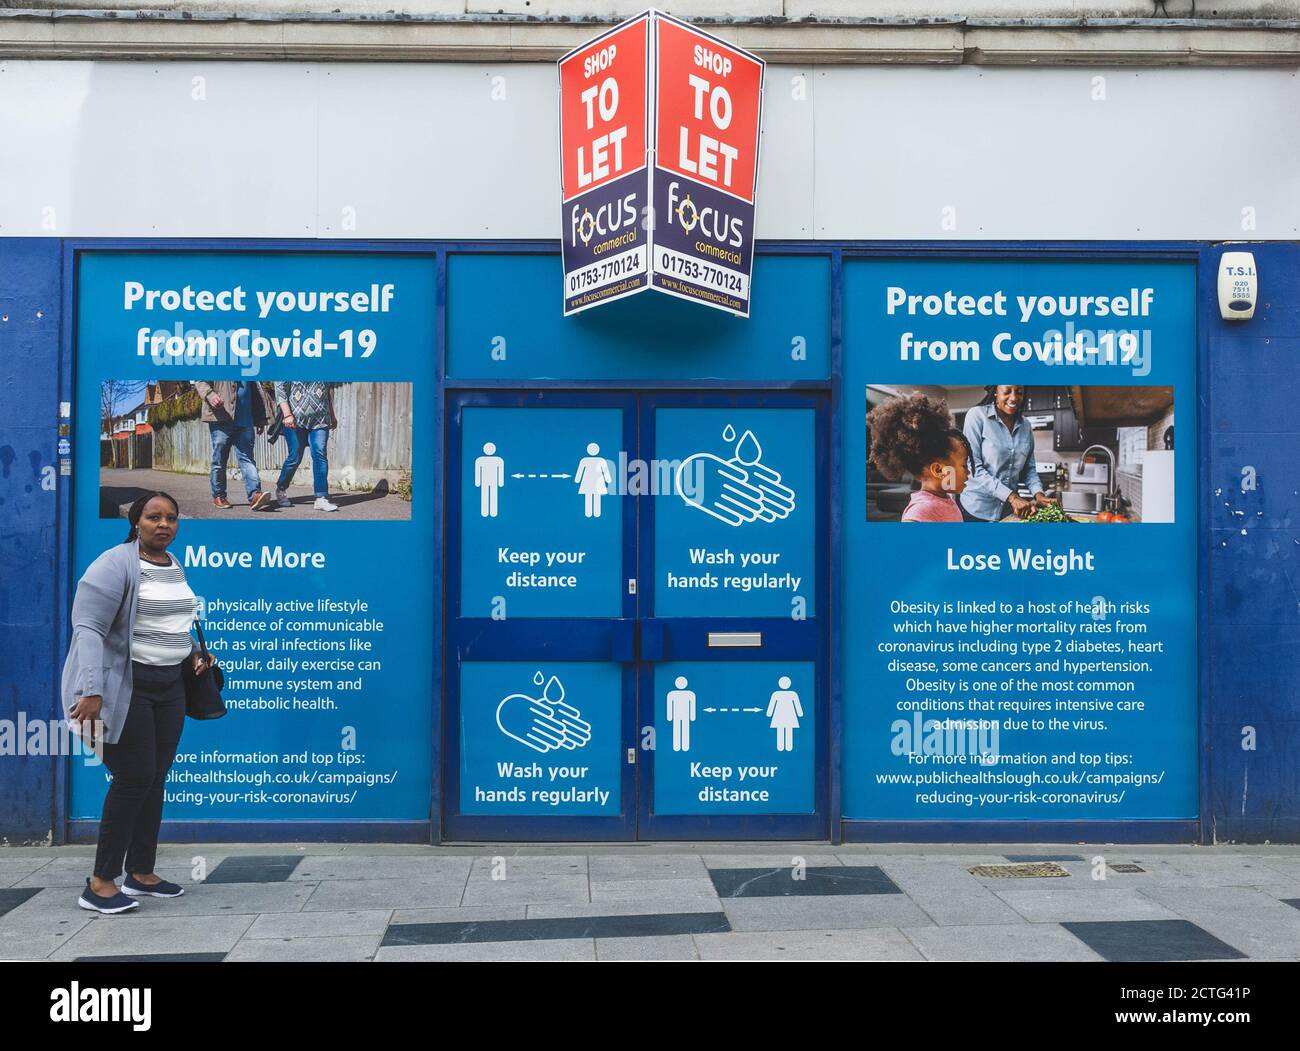 A women stands in front of a large public health poster in Slough, reminding people how to protect themselves from Covid. Stock Photo